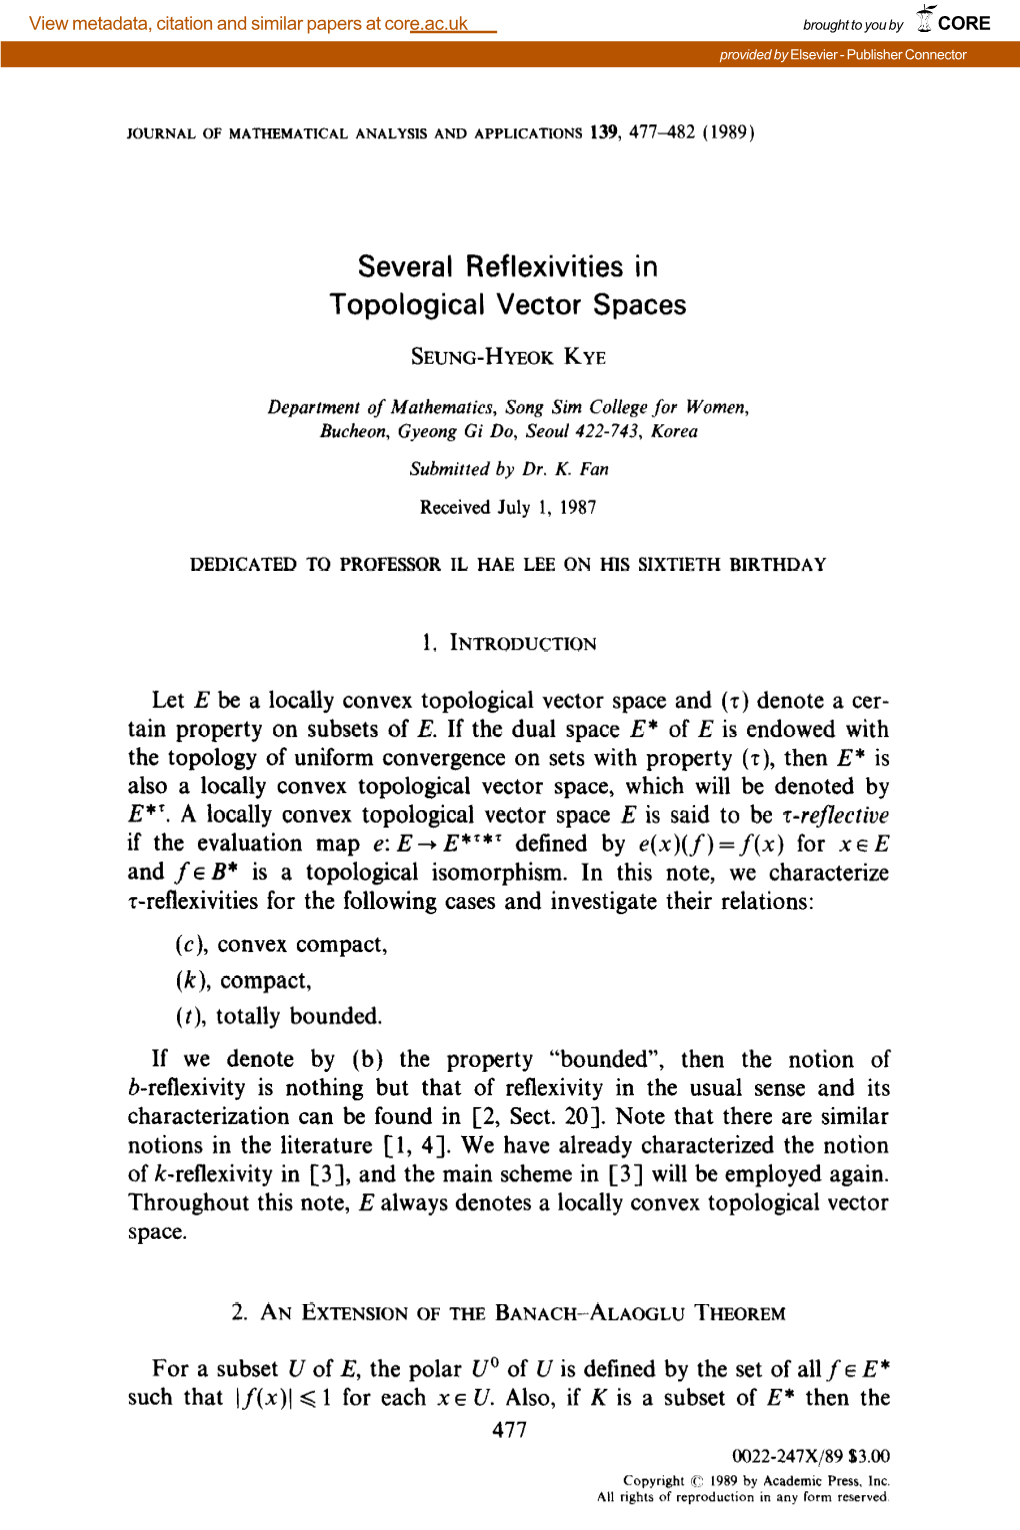 Several Reflexivities in Topological Vector Spaces